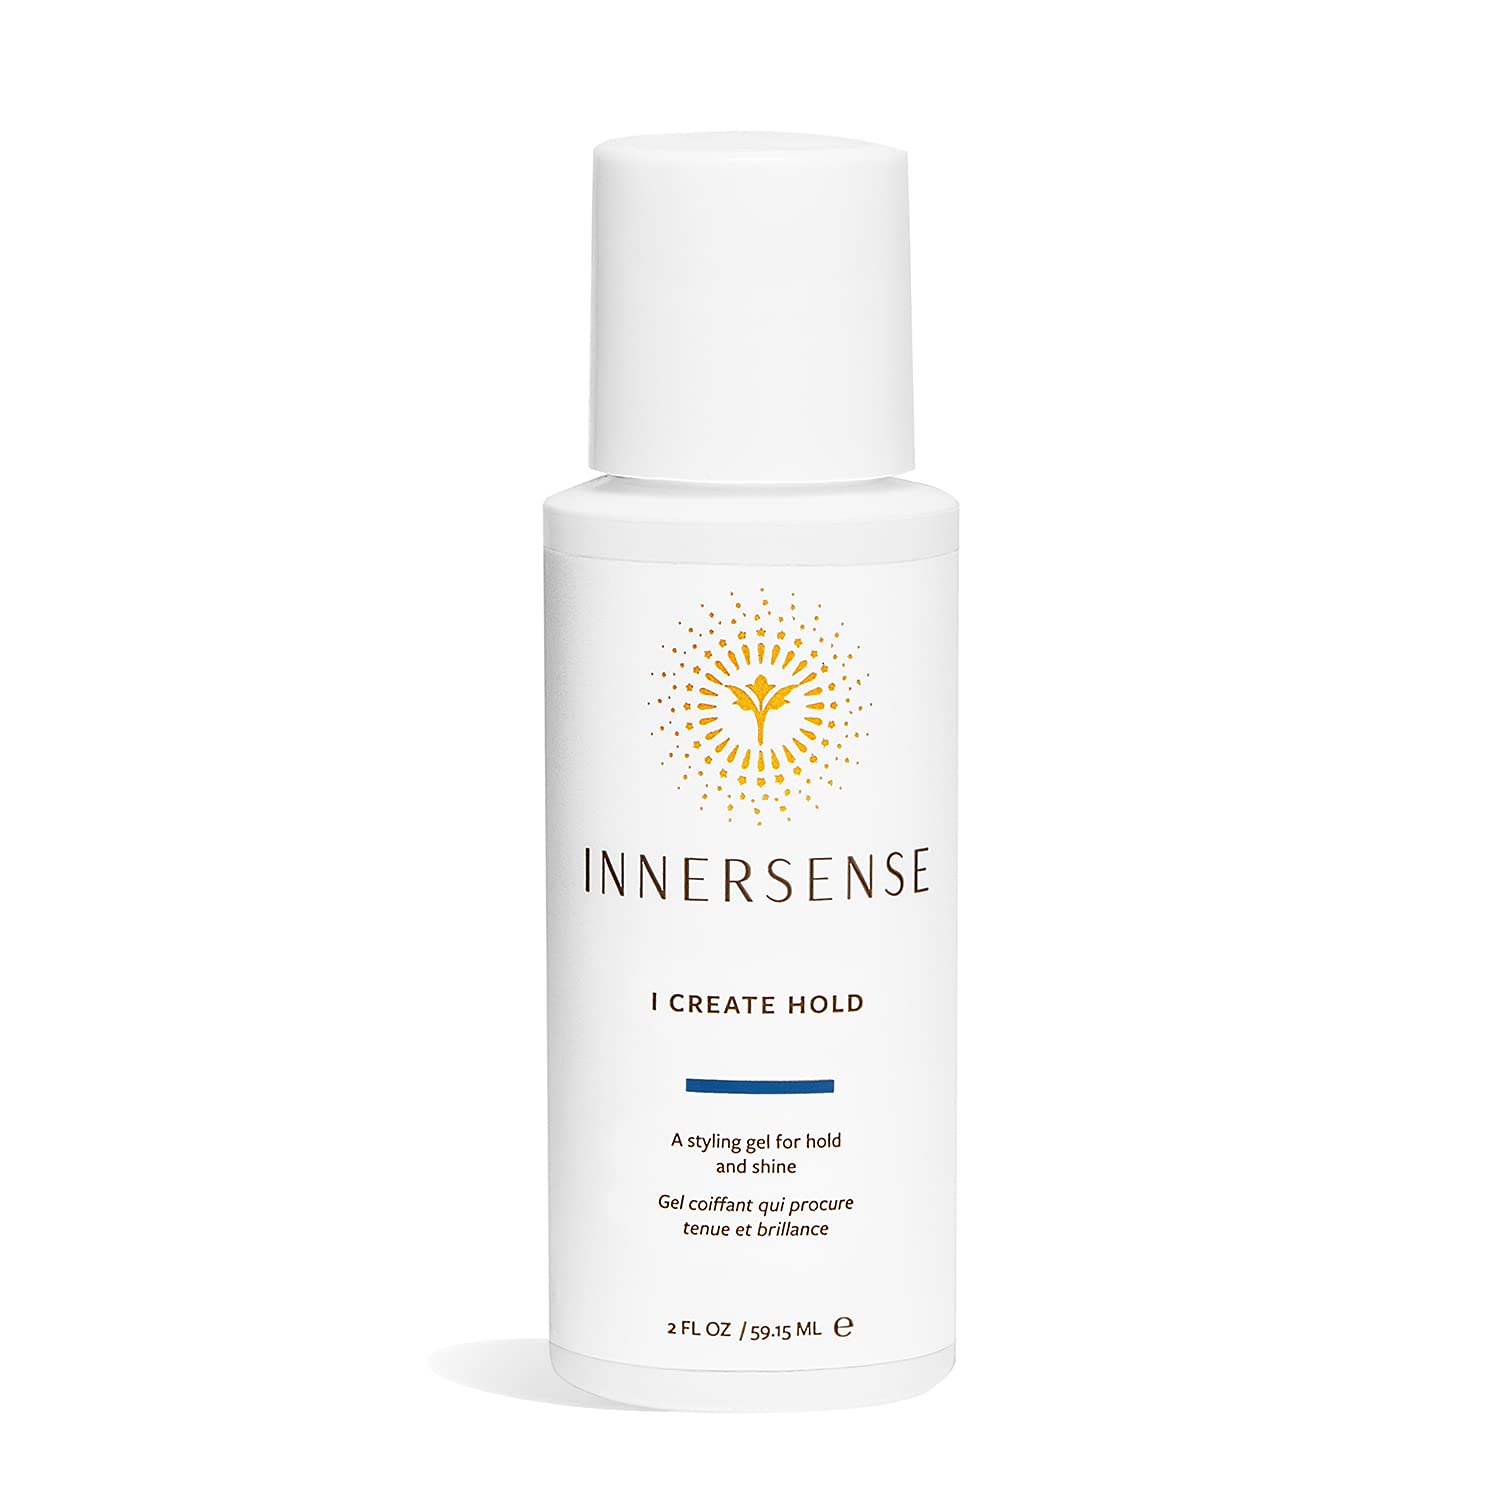 INNERSENSE Organic Beauty - Natural I Create Hold Styling Gel | Non-Toxic, Cruelty-Free, Clean Haircare